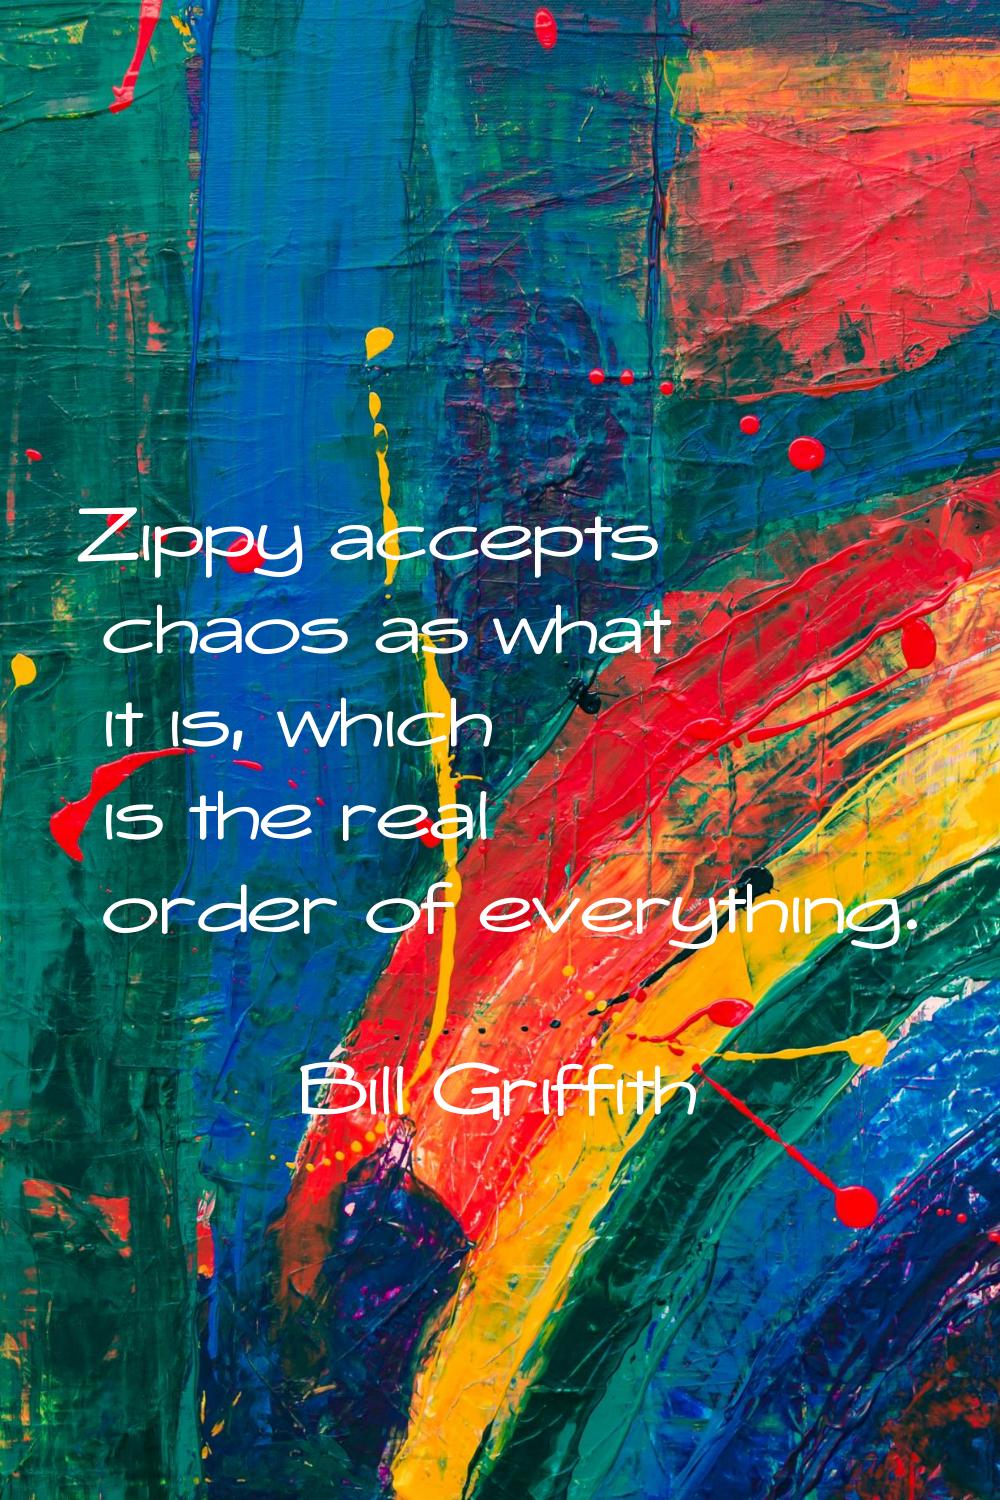 Zippy accepts chaos as what it is, which is the real order of everything.